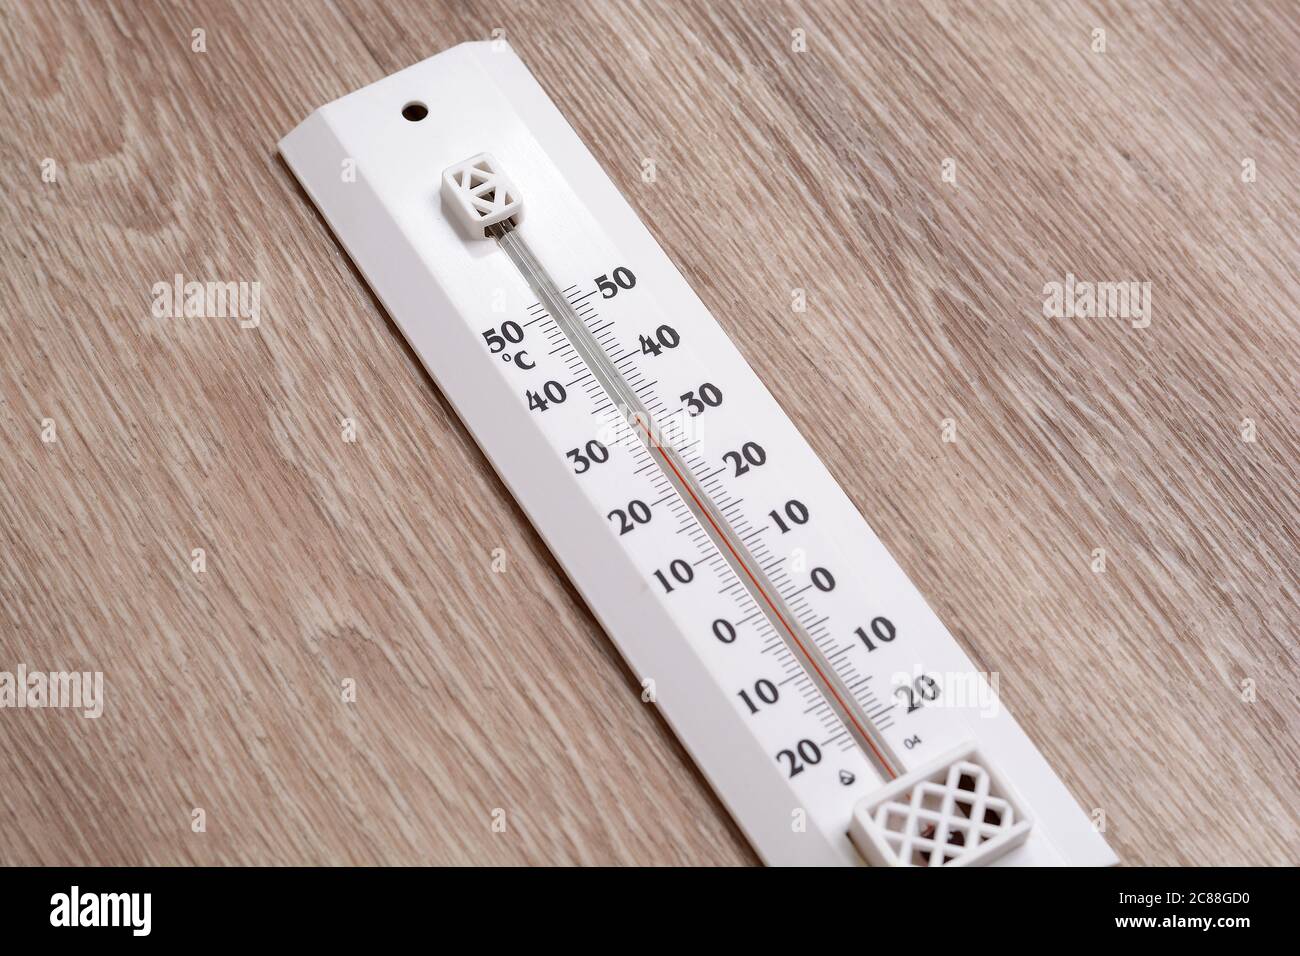 Meteorology thermometers. Cold and heat temperature. Celsius on thermometers Stock Photo